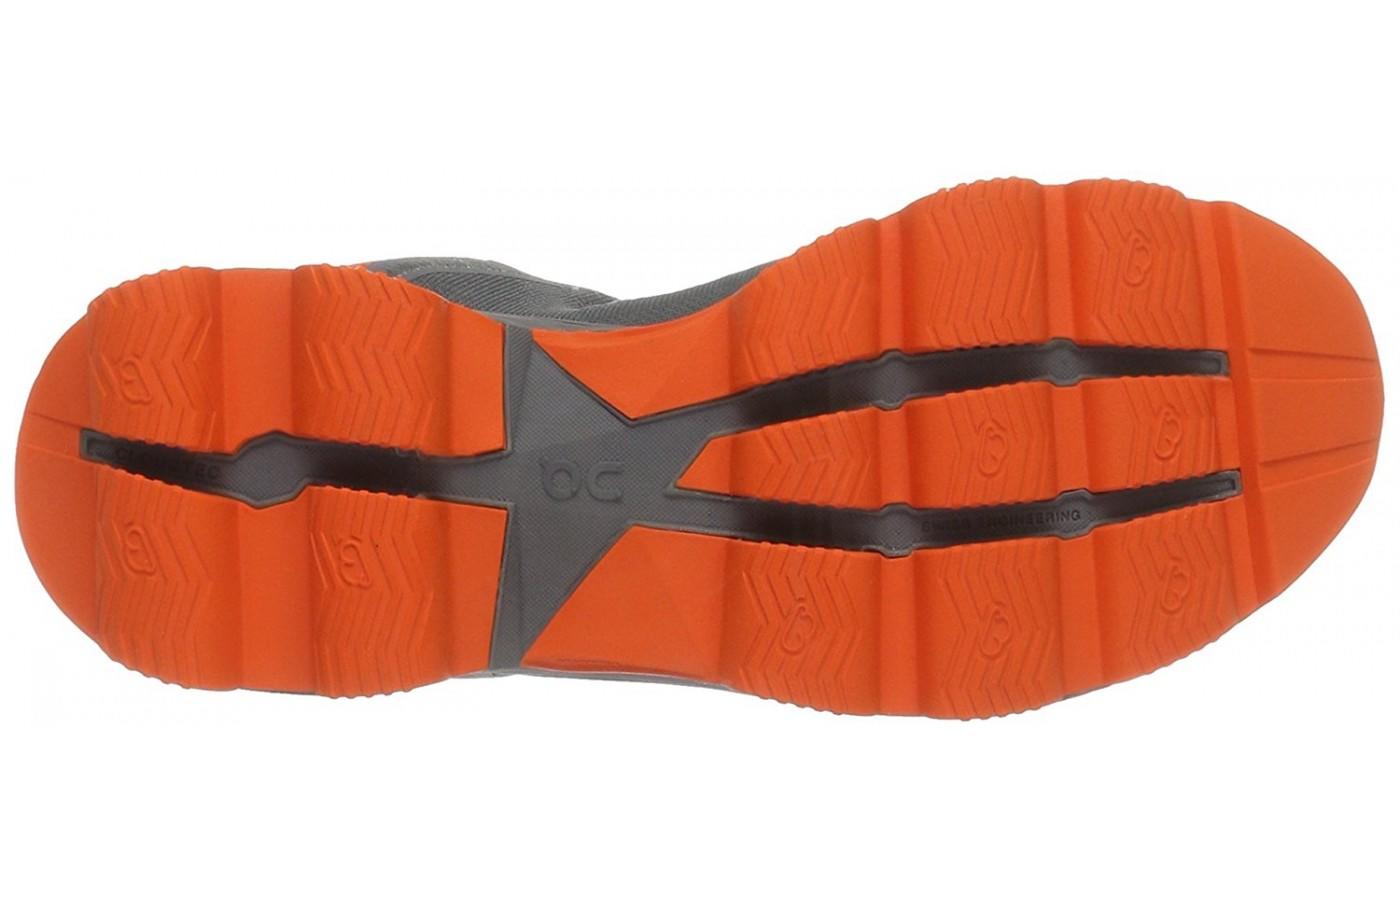 The On CloudSurfer outsole features Cloutec pillows 